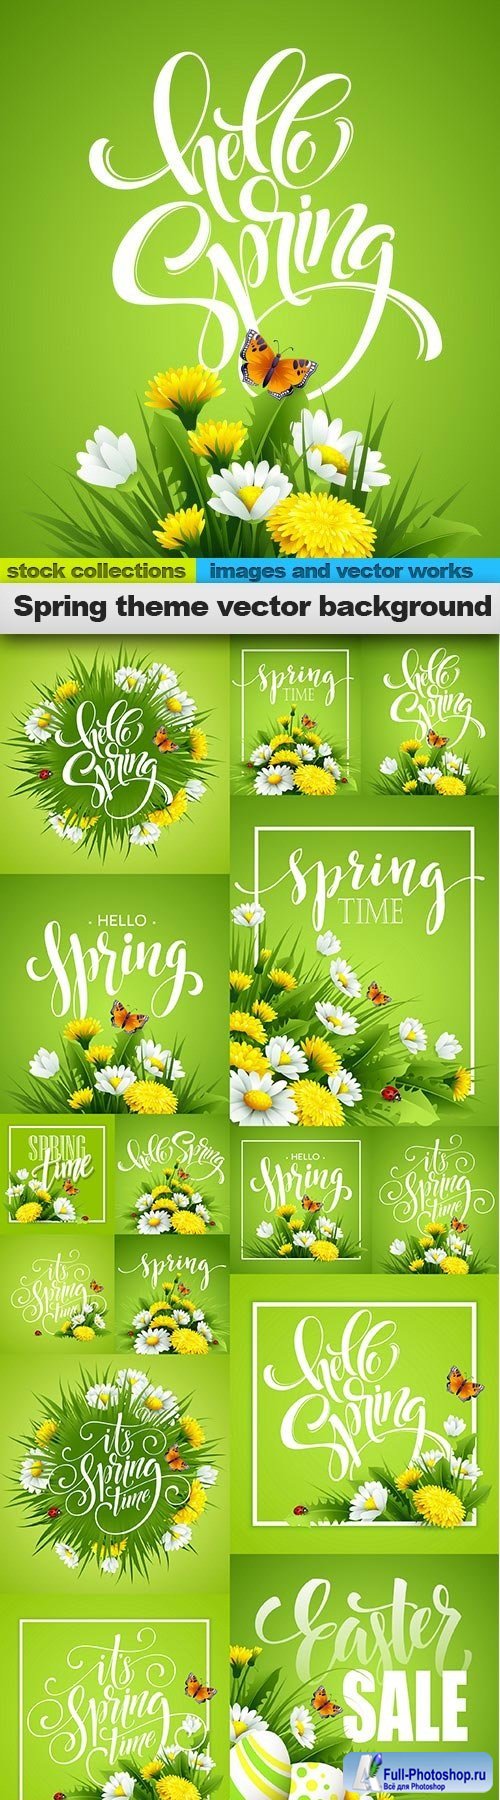 Spring theme vector background, 15 x EPS